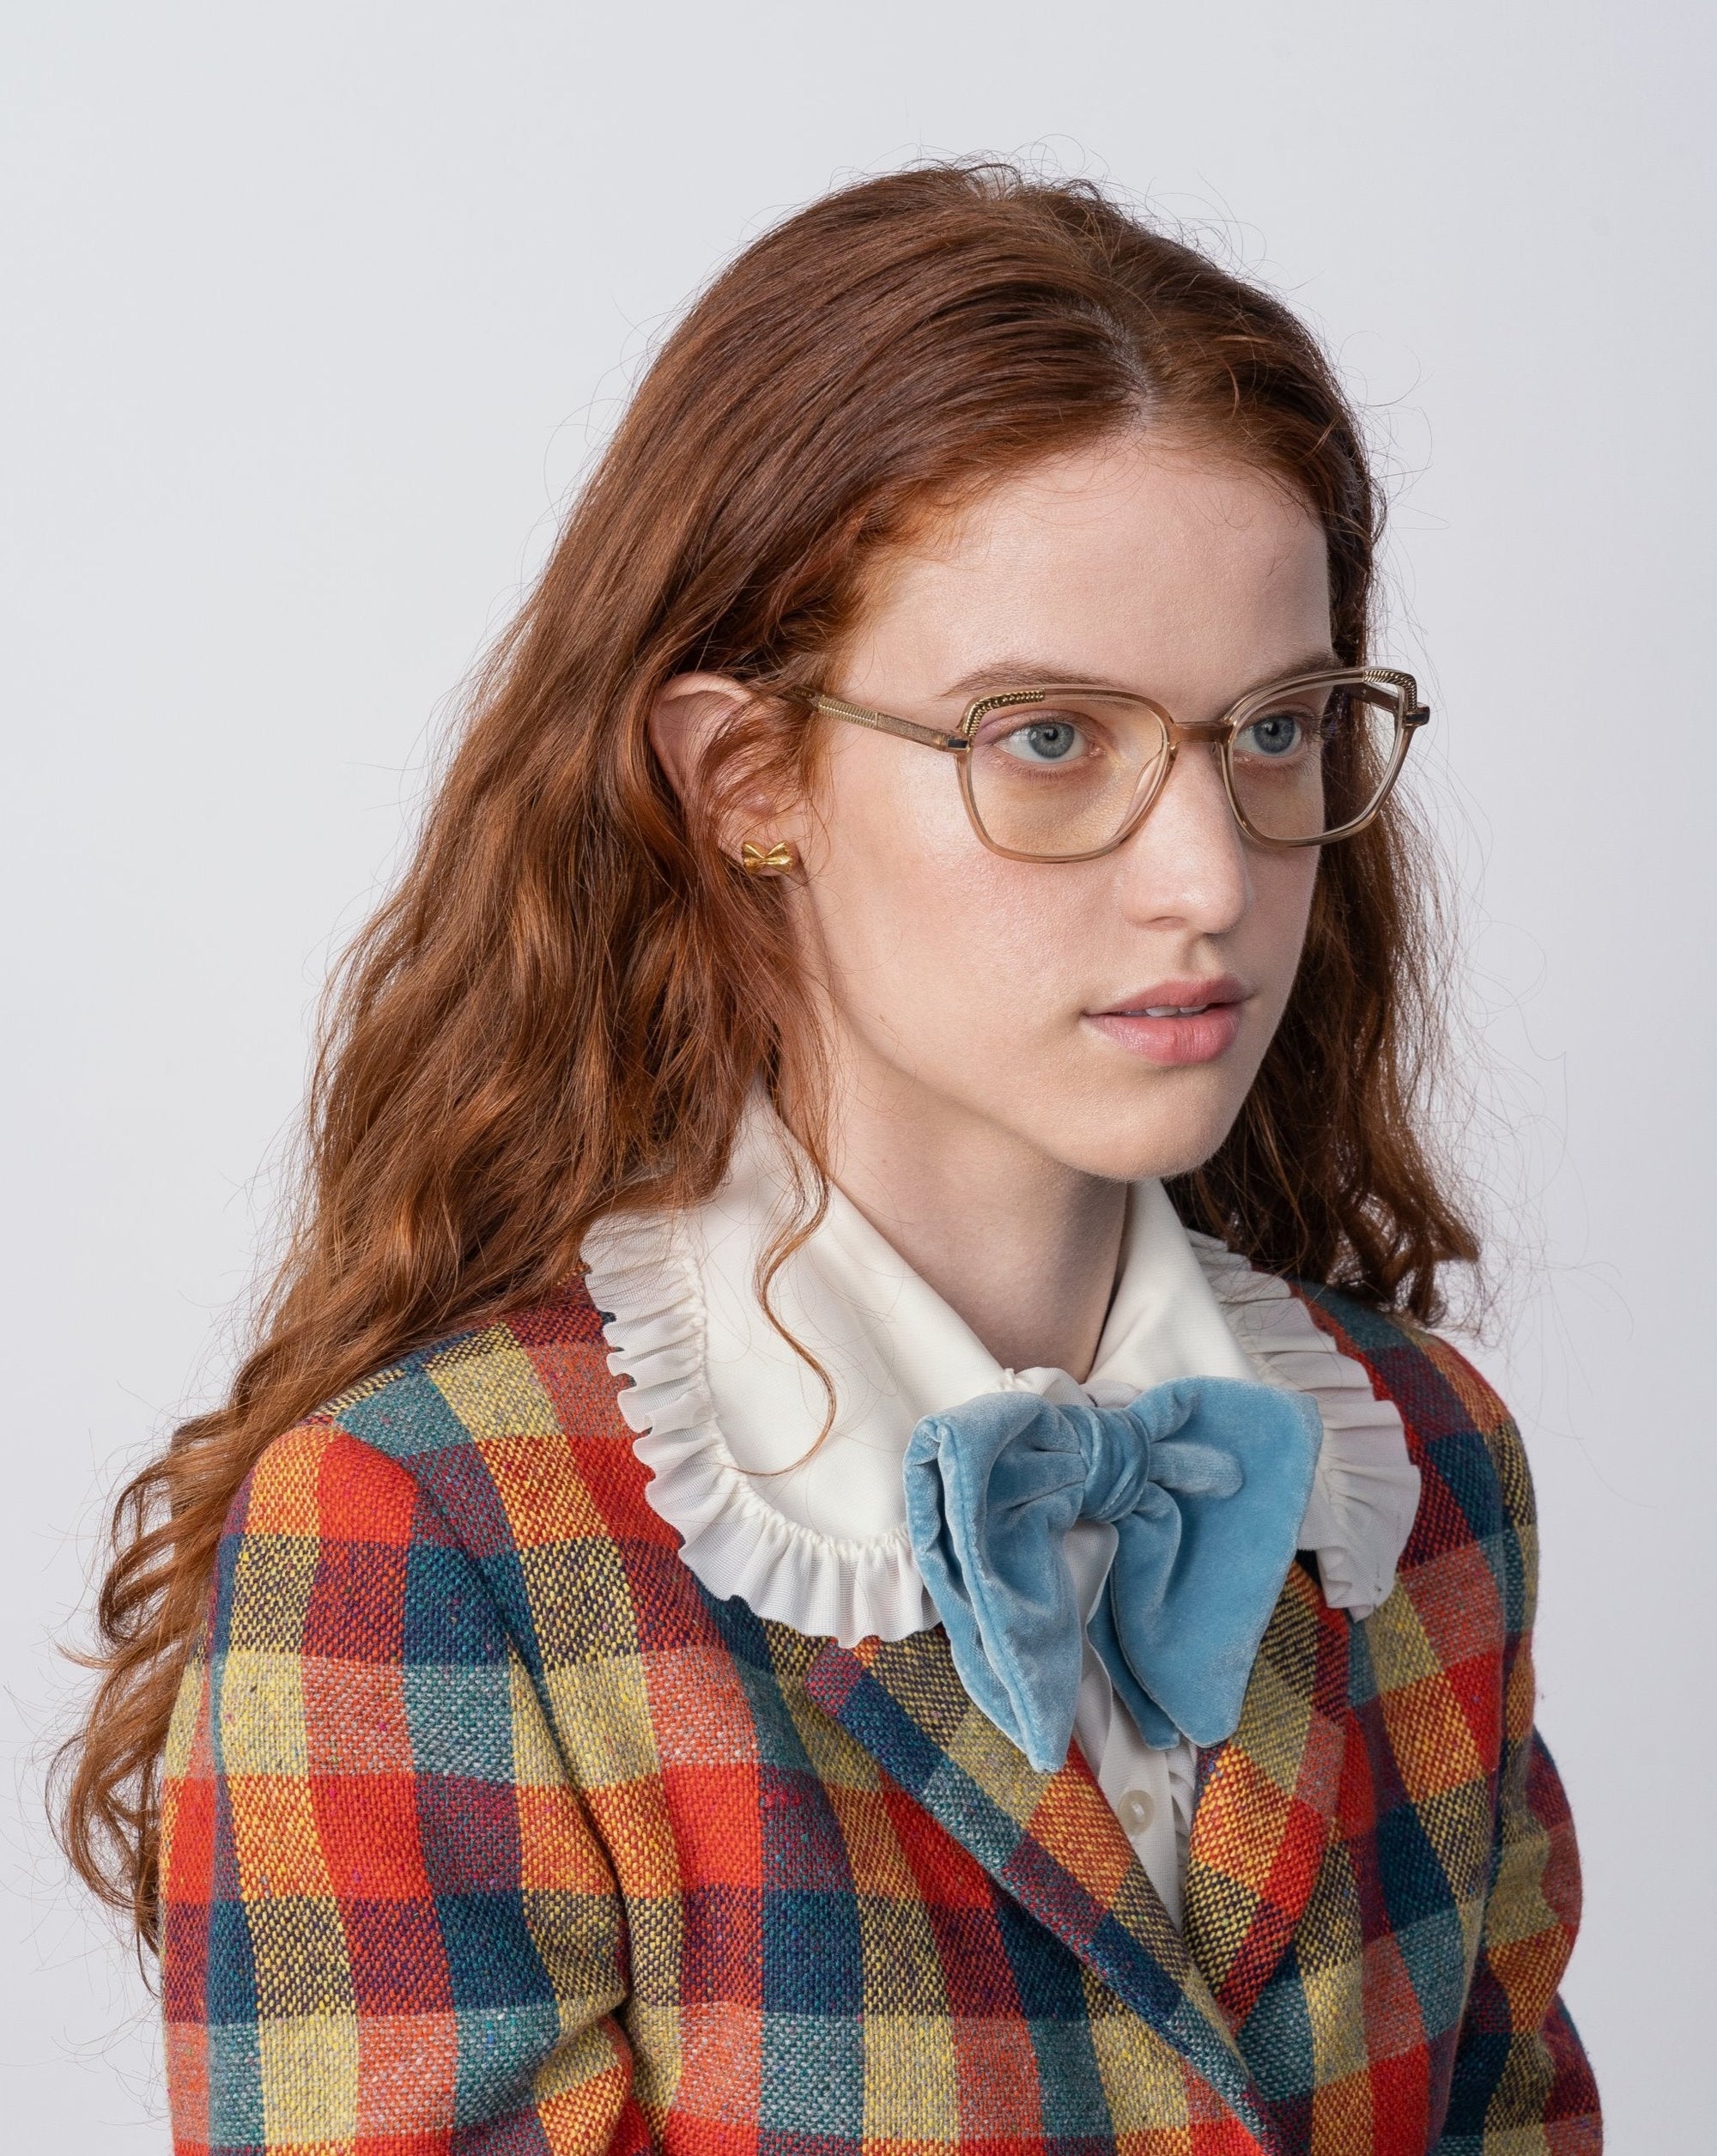 A person with long, wavy auburn hair, wearing Mimosa by For Art's Sake® glasses with blue light filters, a white blouse with a ruffled collar, and a blue velvet bow tie is dressed in a multicolored plaid blazer. They are looking off to the side against a plain background.